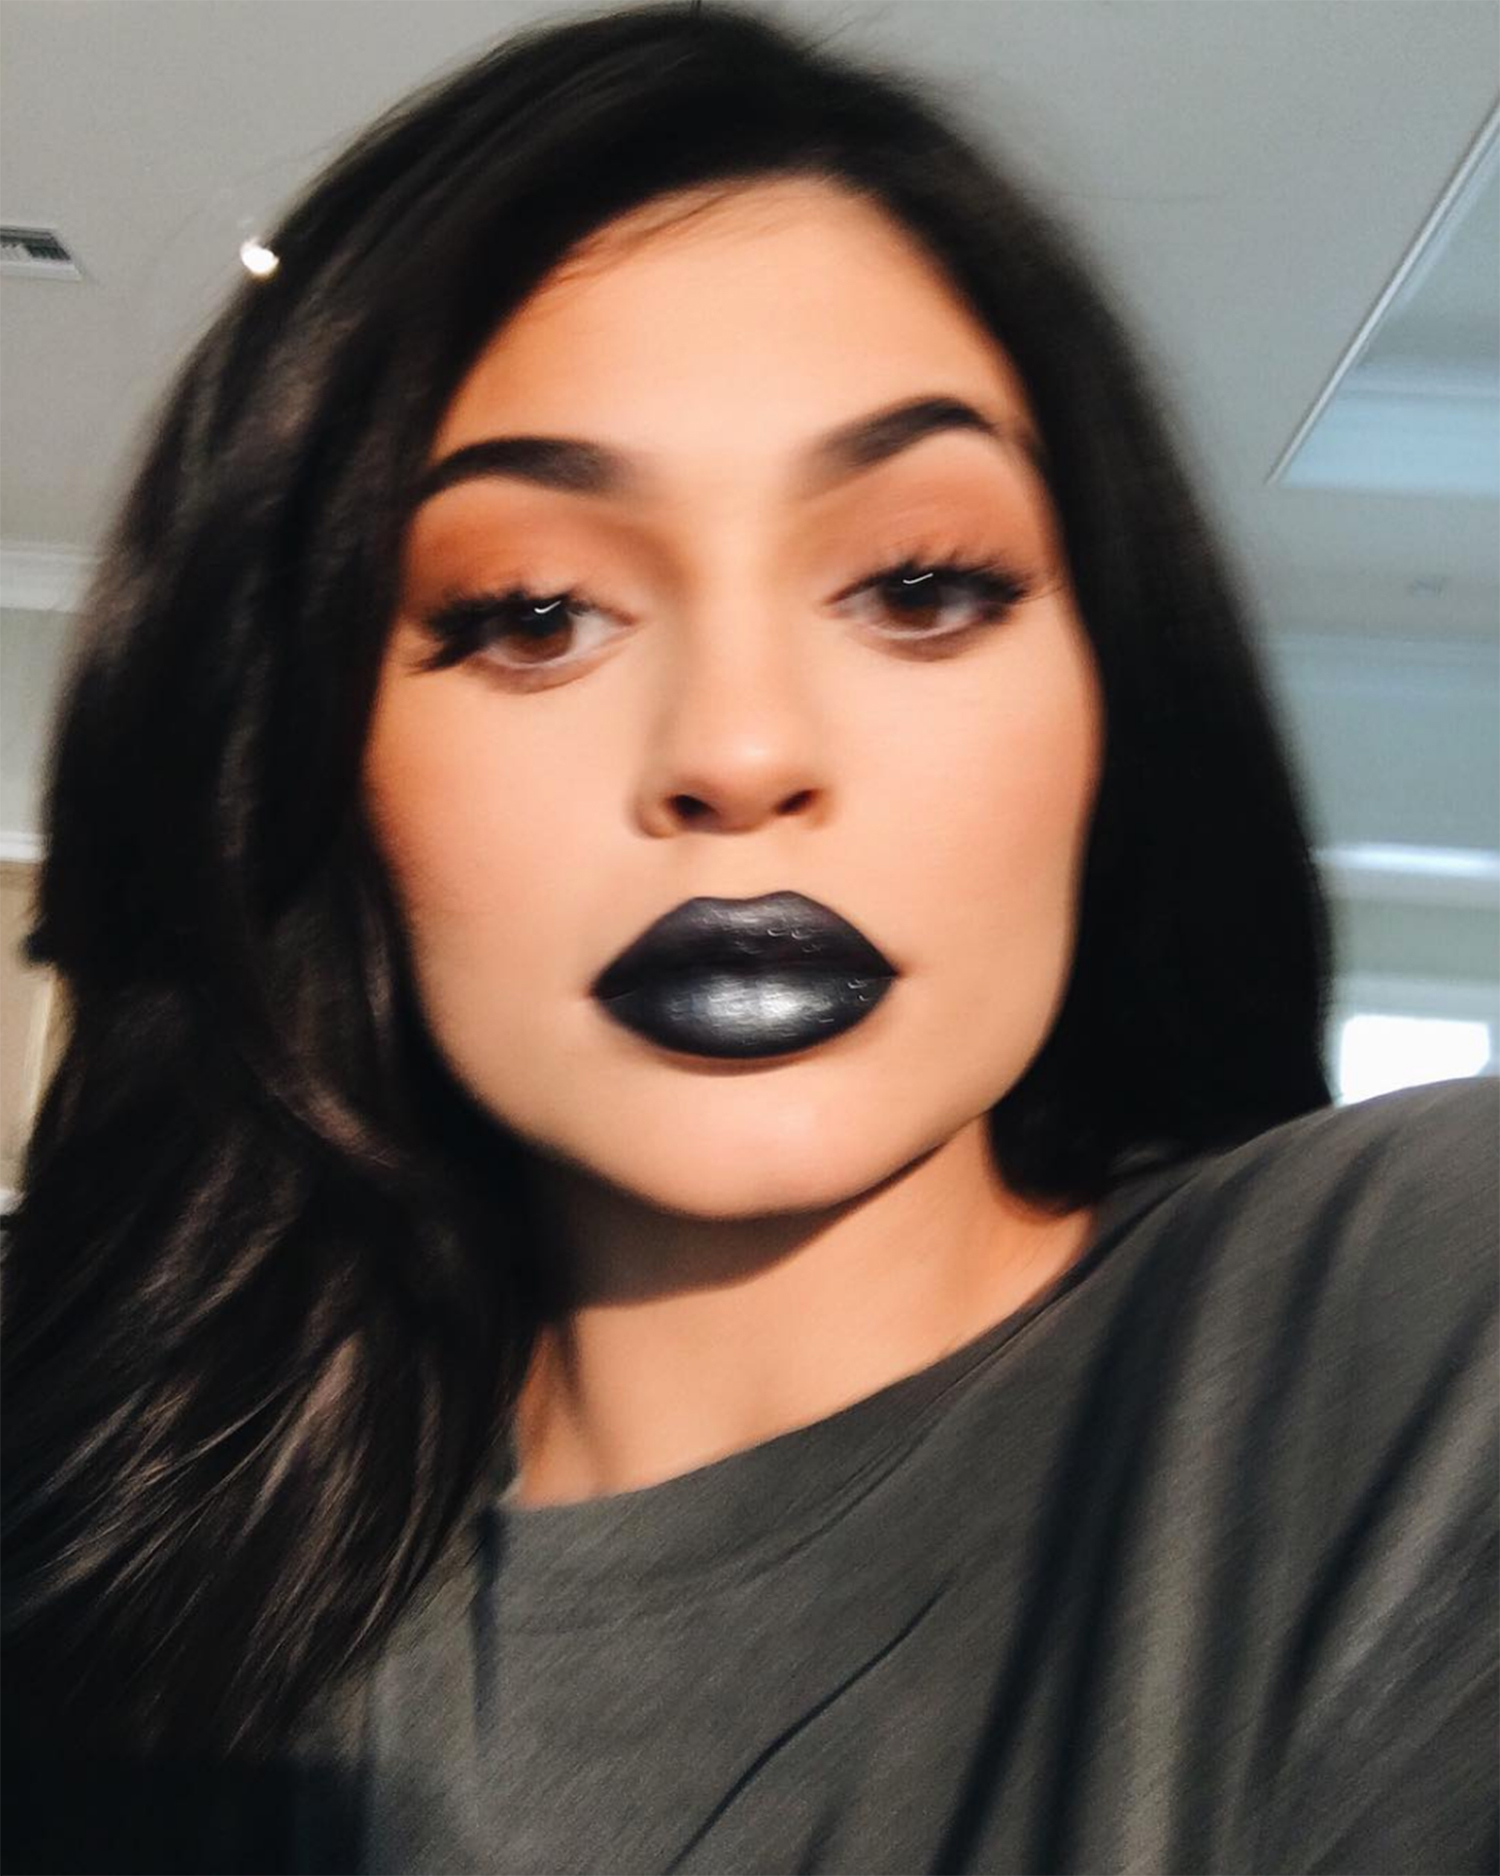 Kylie Jenner Reveals Her Edgy New Lip Kit Shade